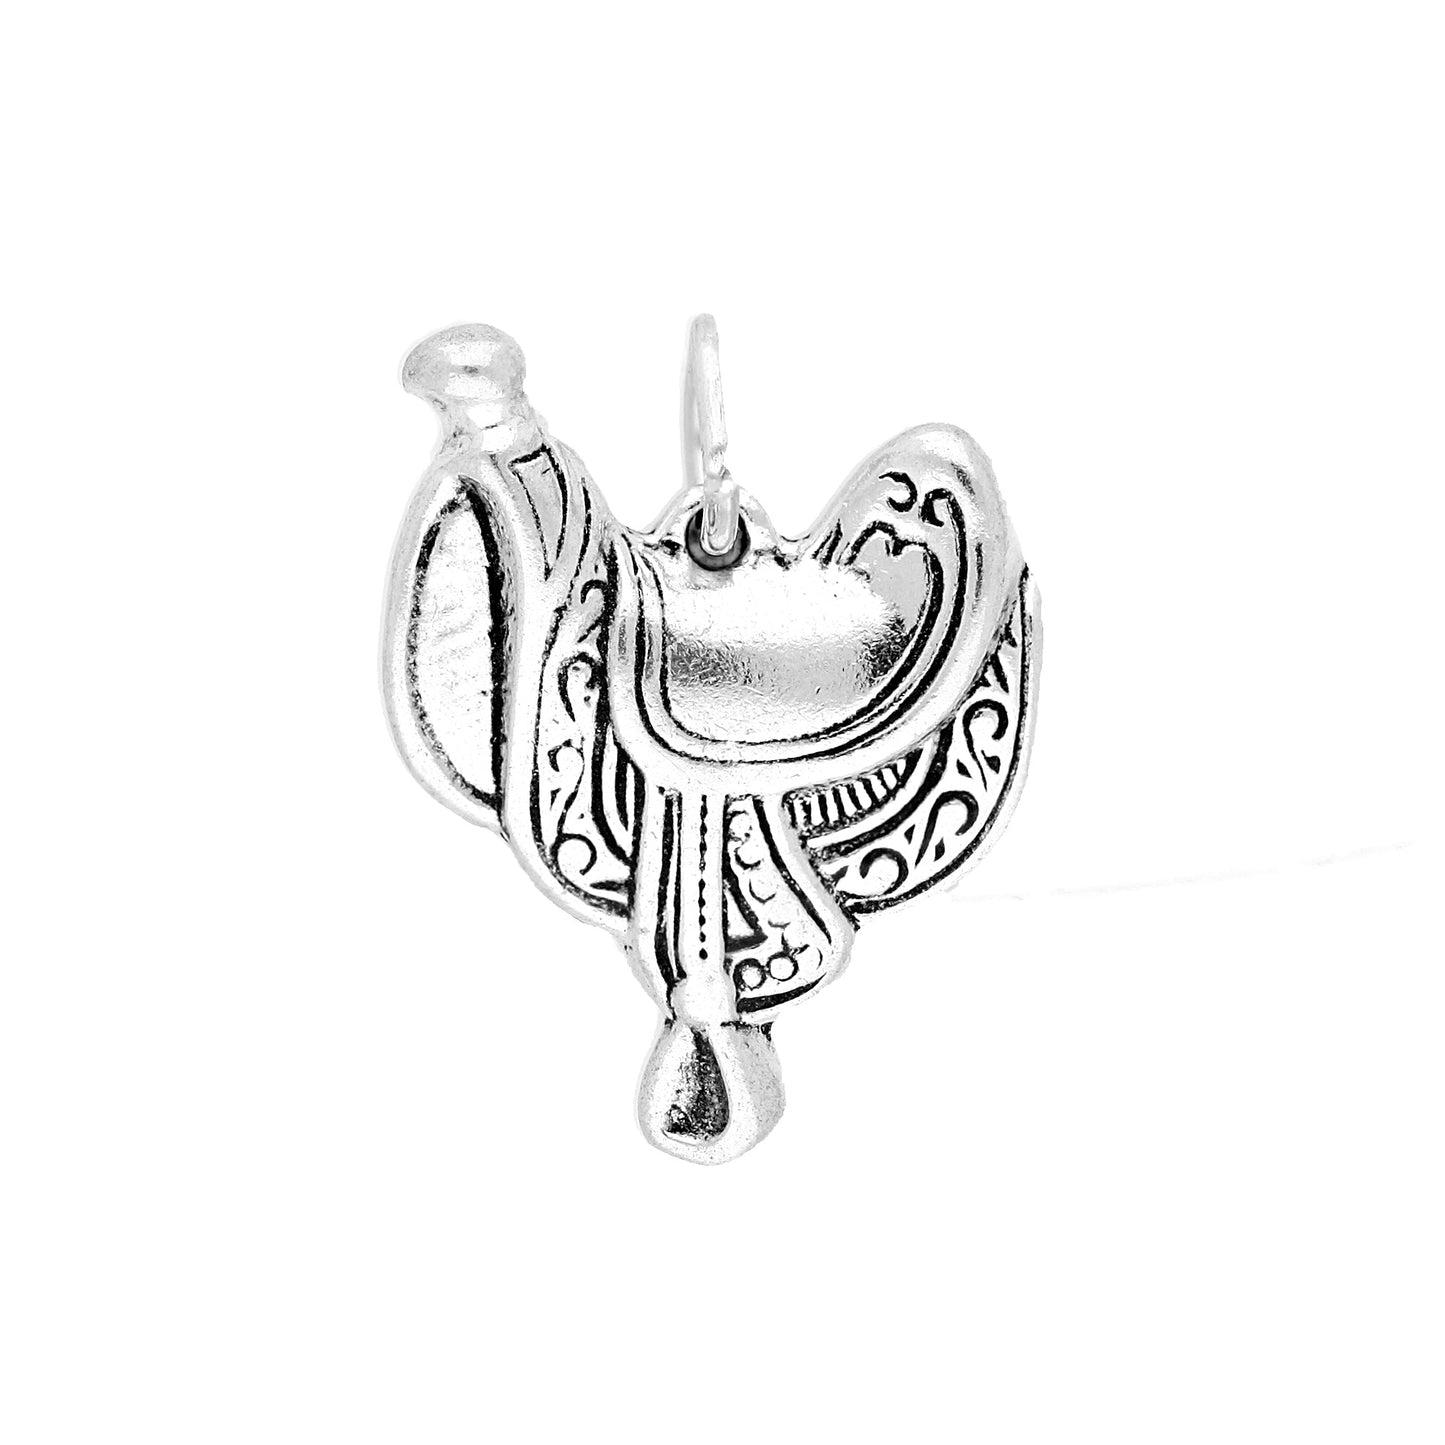 Sterling Silver Saddle Charm